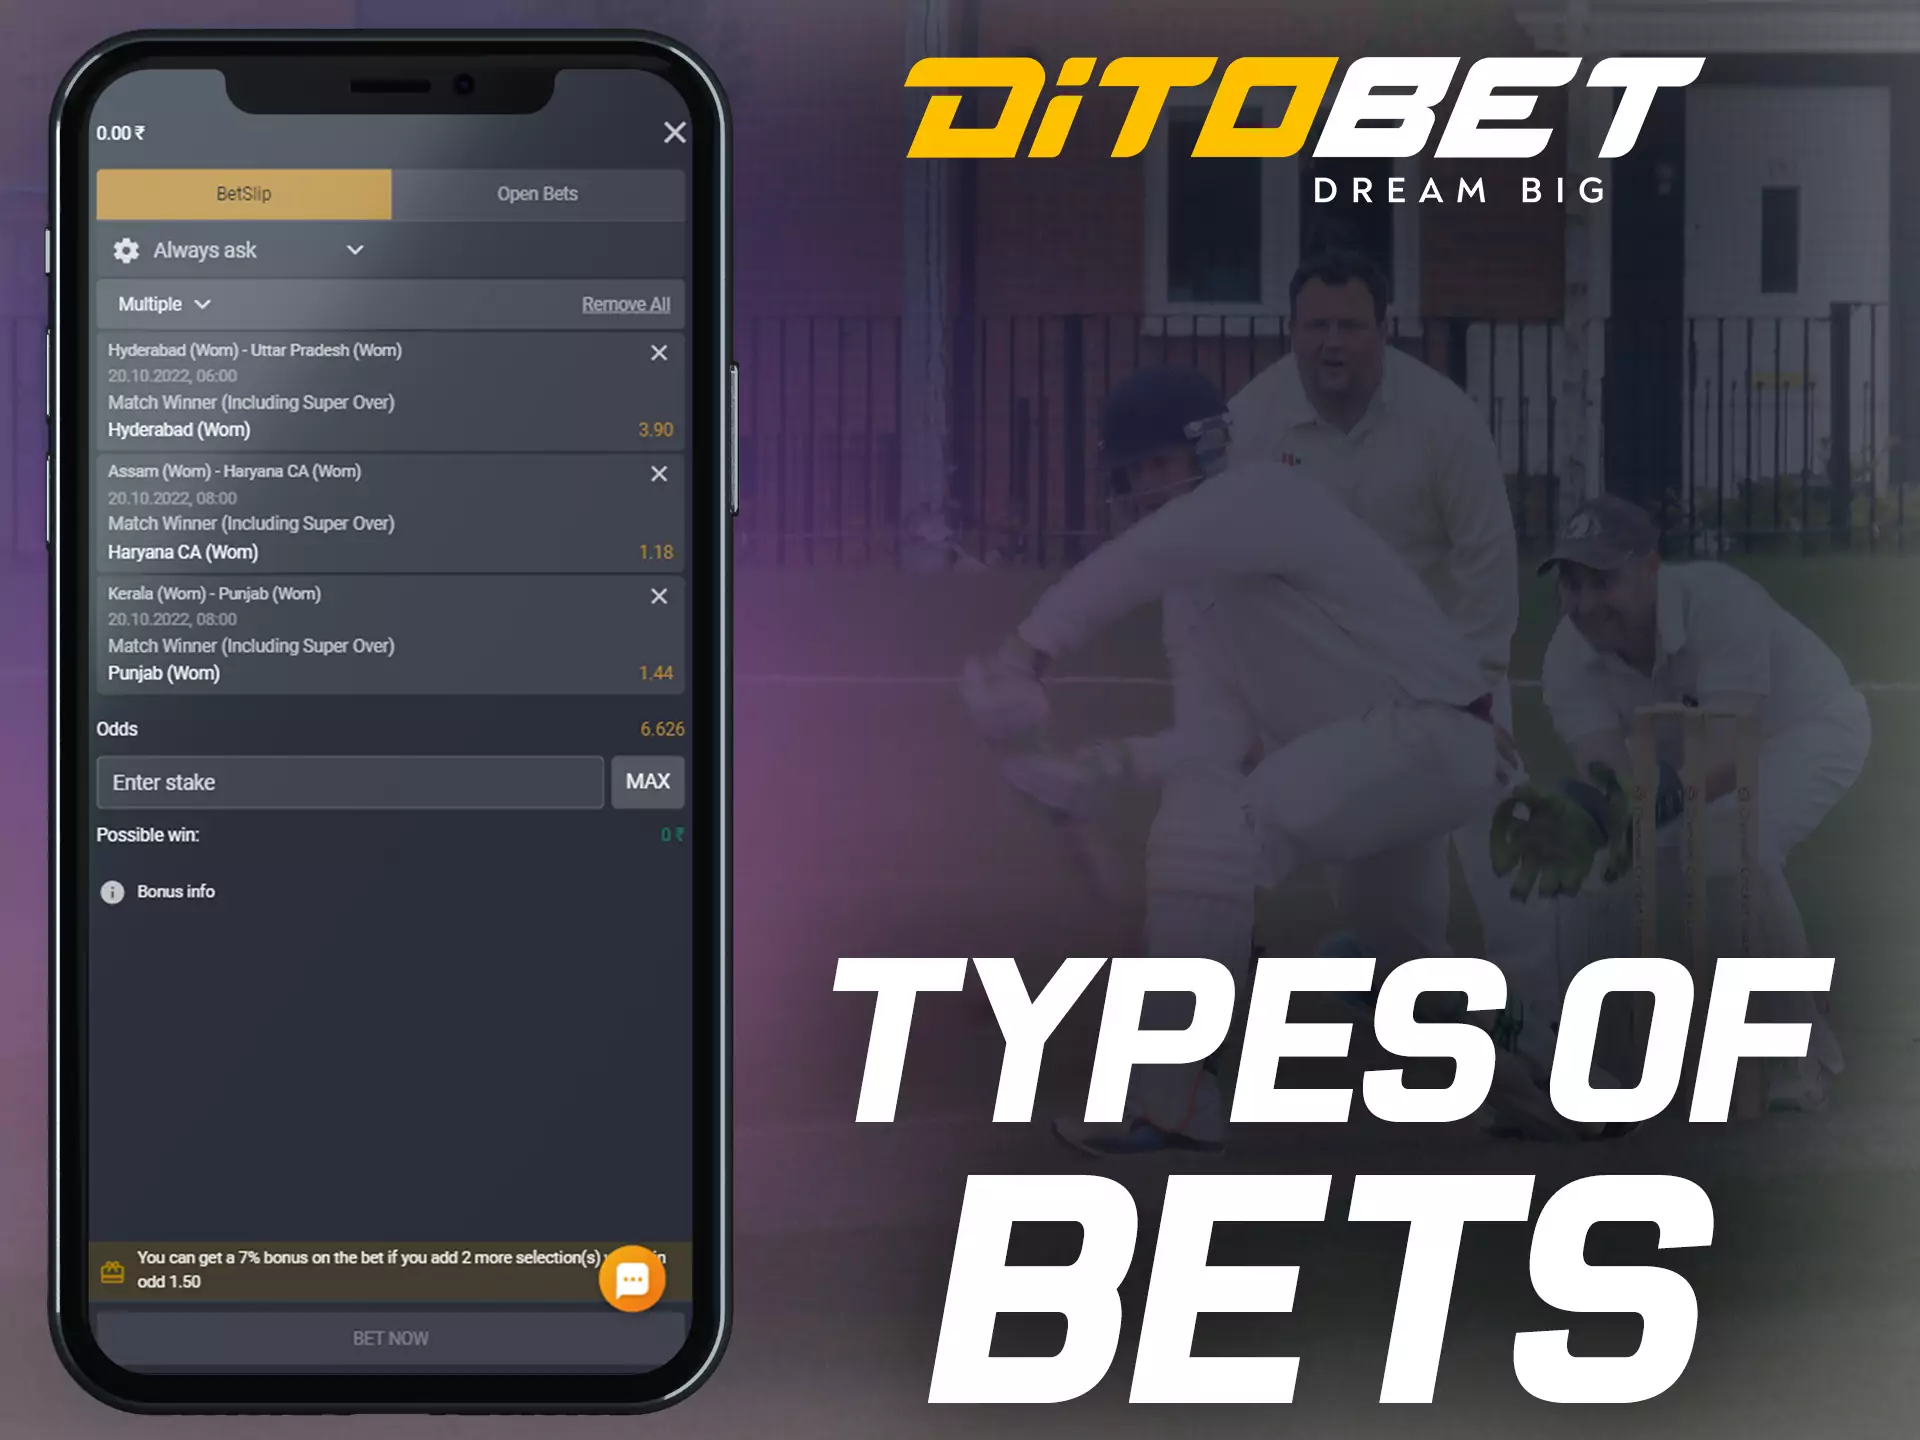 Try different types of bets in Ditobet.